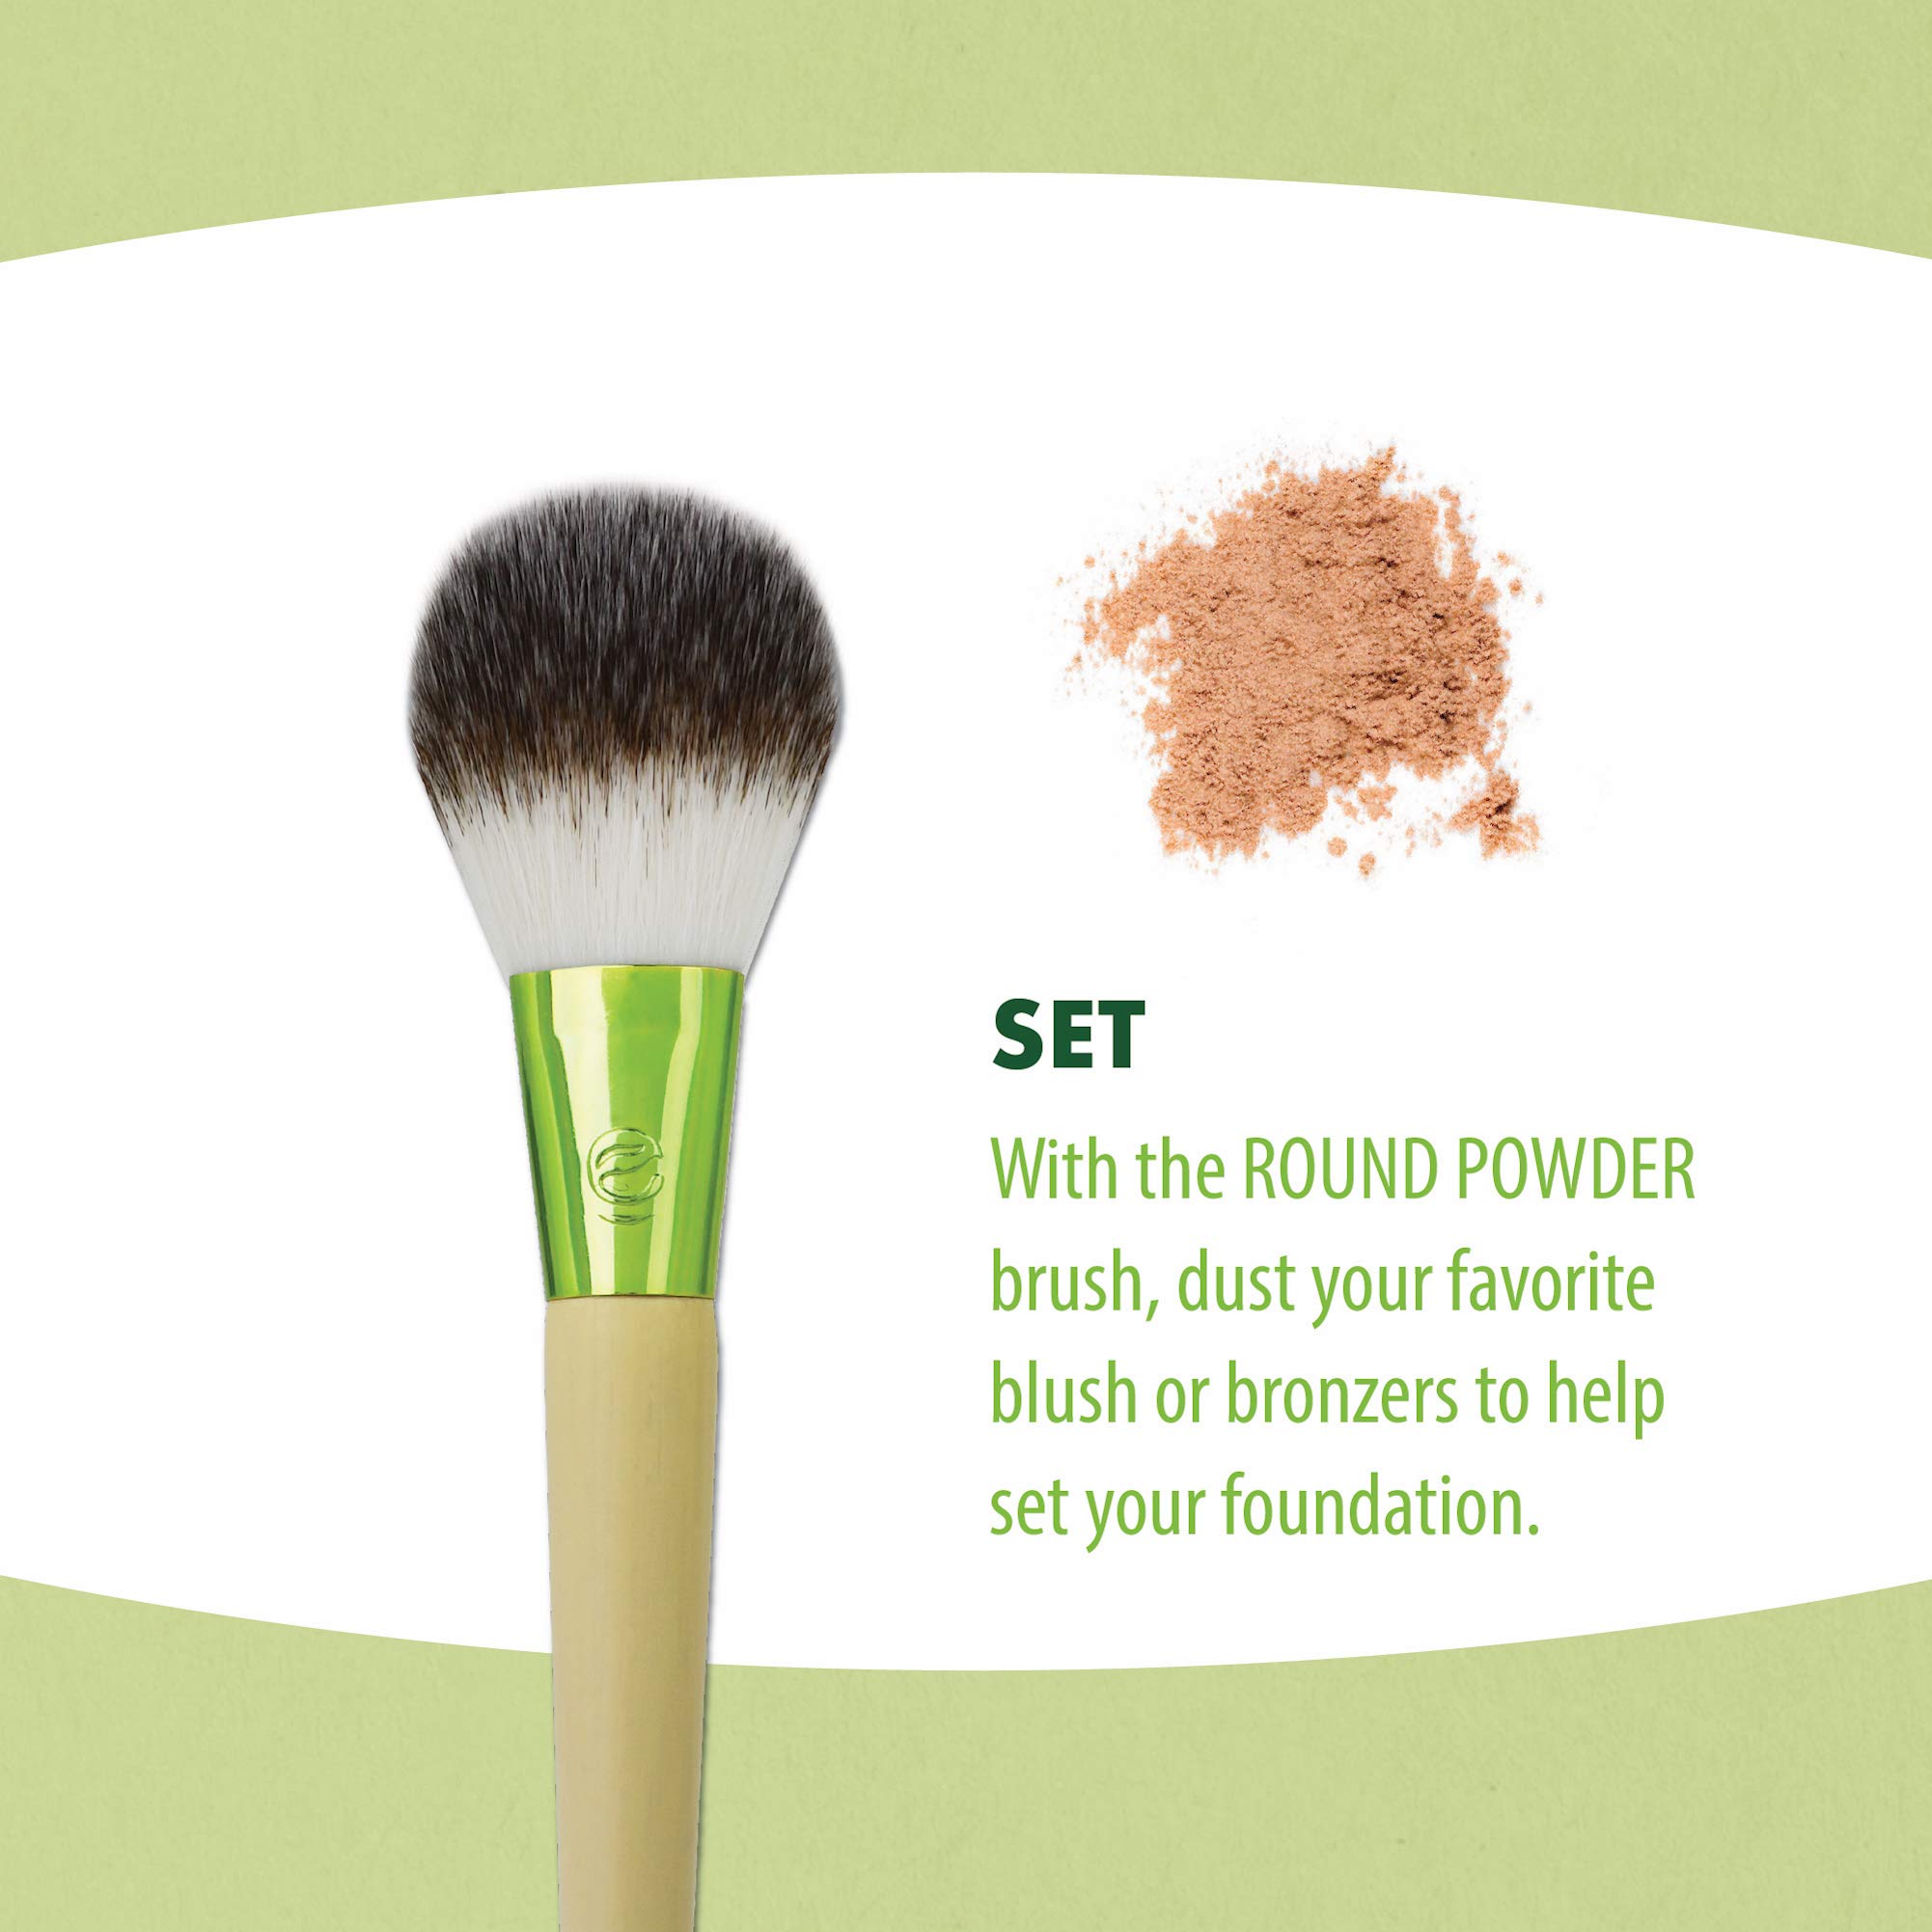 EcoTools Vibes Kit Makeup Brush Gift Set with Travel Brush Bag For Power, Foundation and Concealer